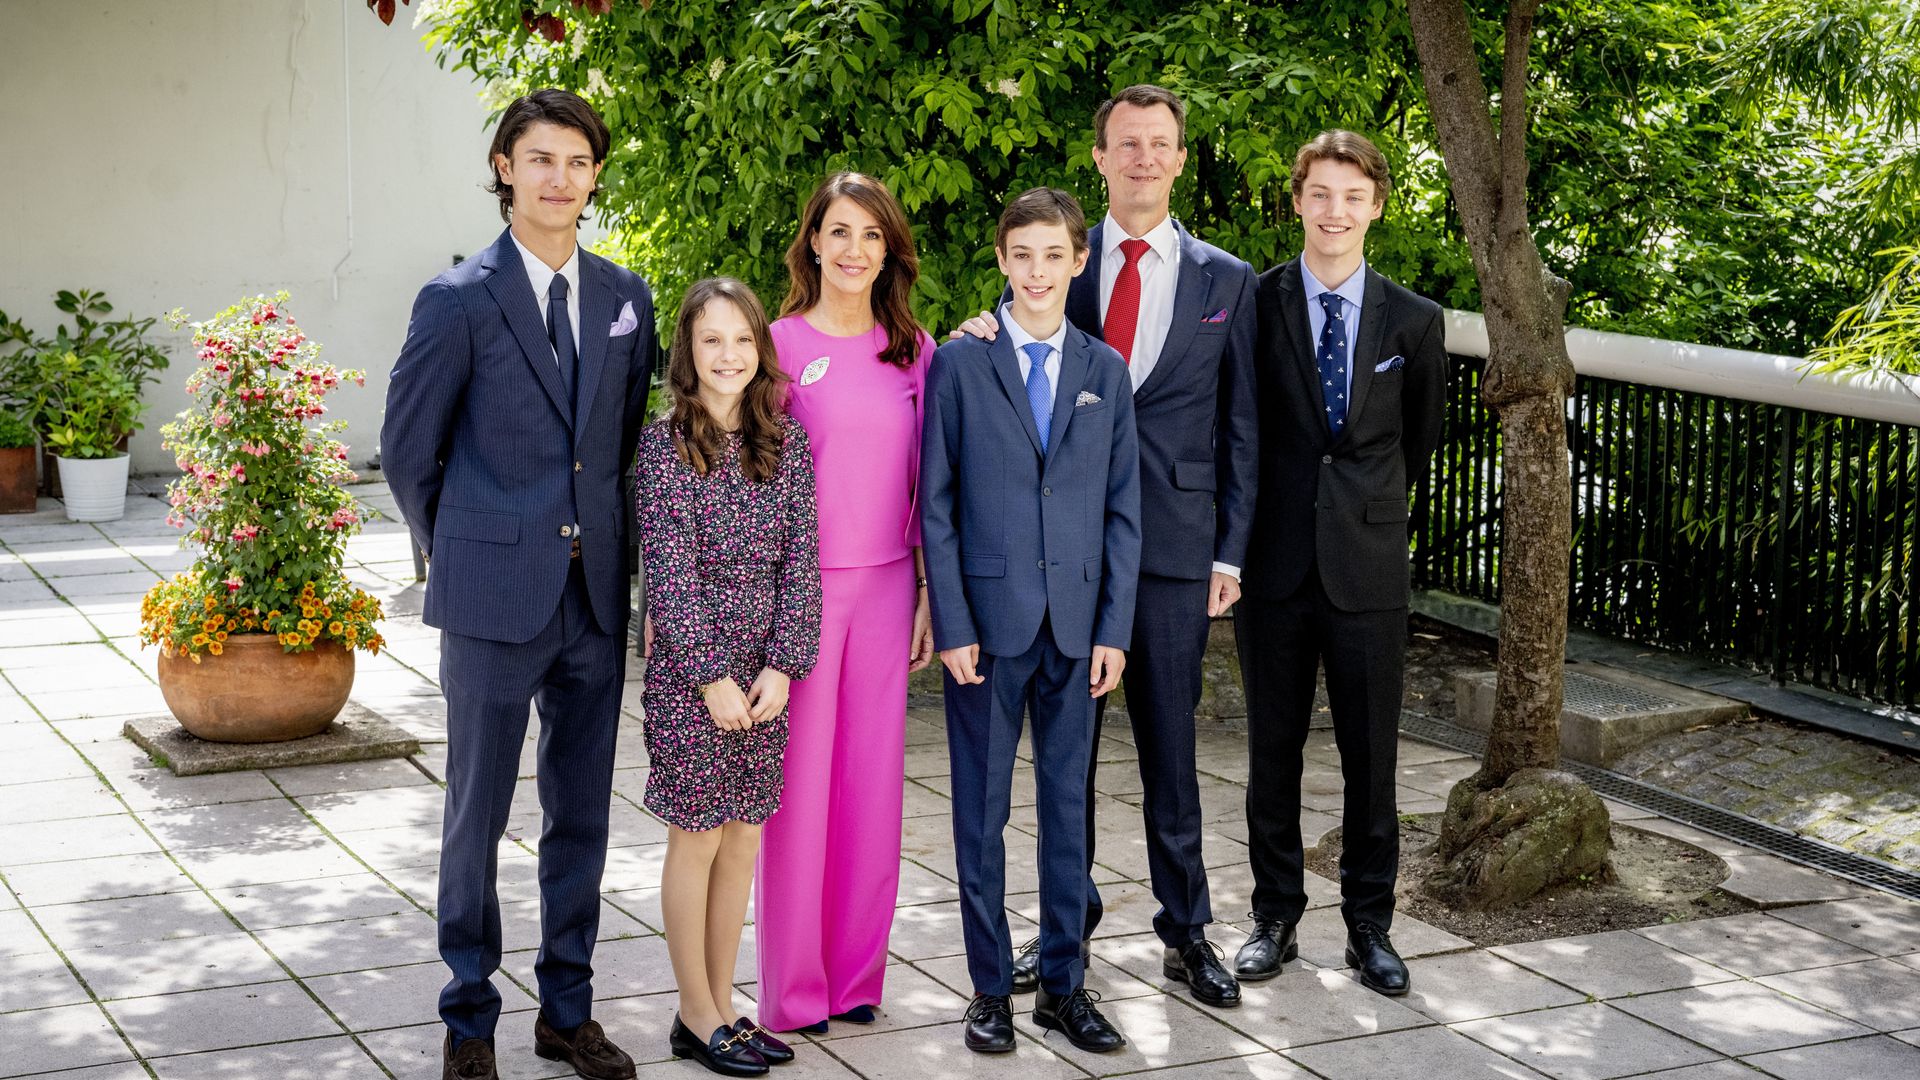 Princess Marie and Prince Joachim pose for a family photo